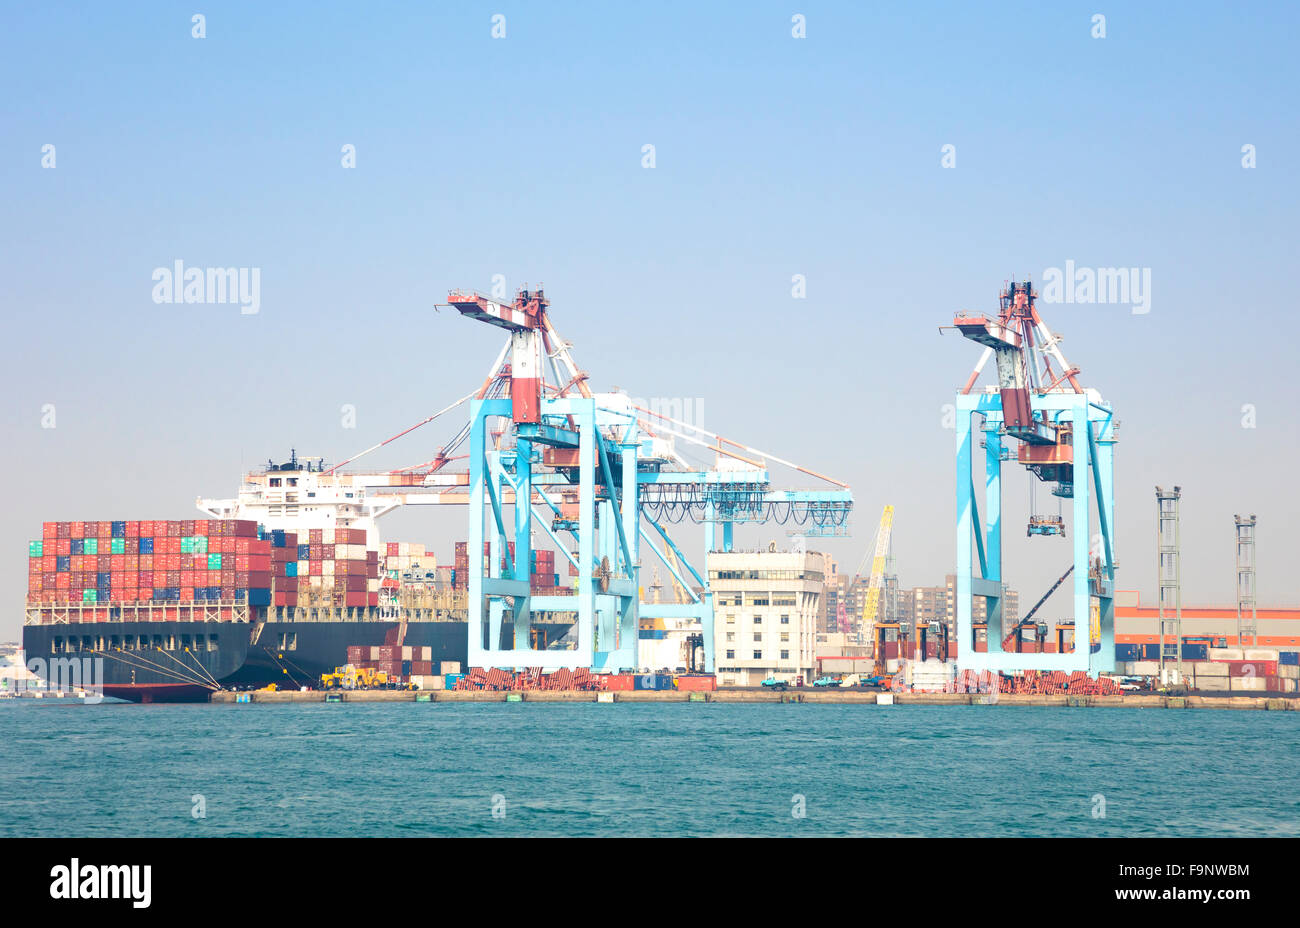 Large container vessel unloaded in Port of kaohsiung Stock Photo